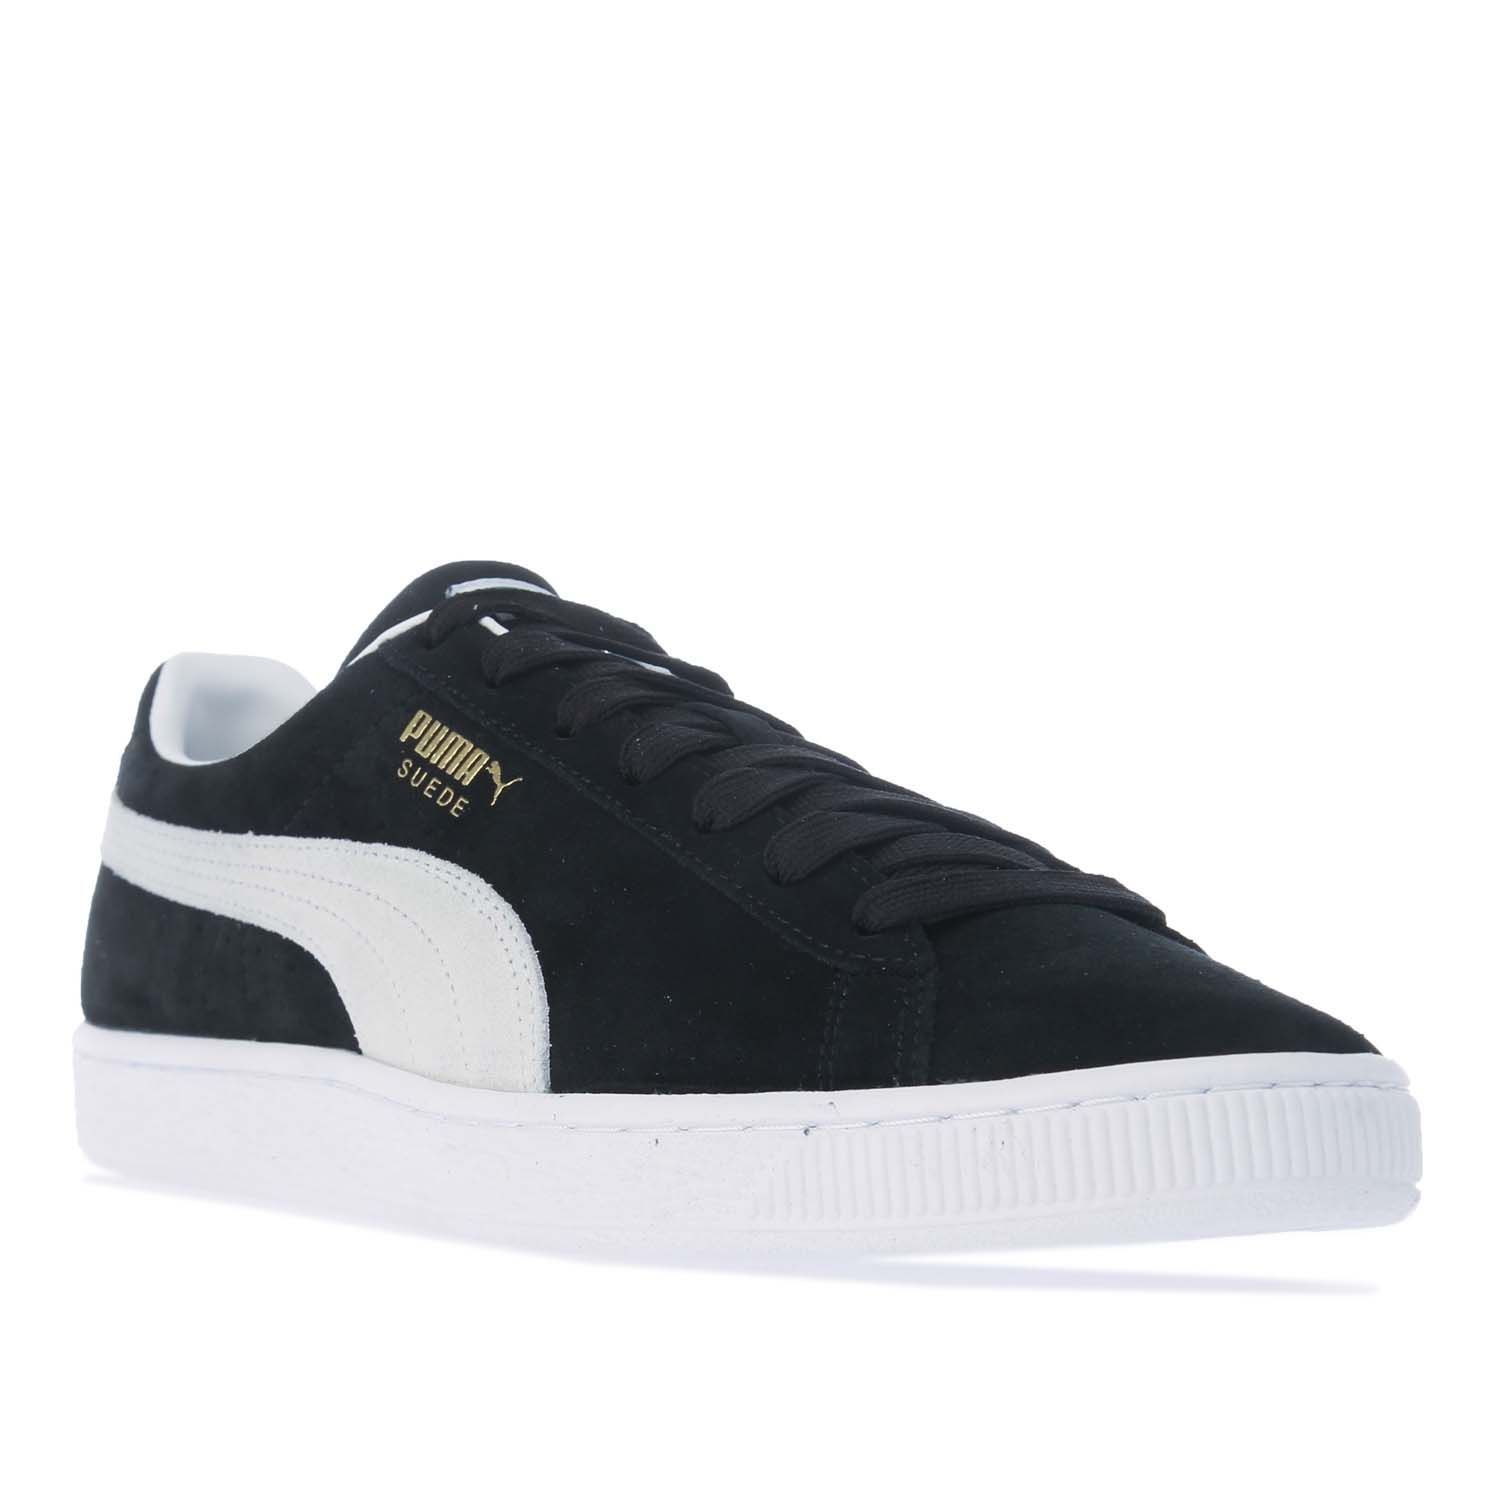 Puma Suede VTG Trainers in black- white.- Leather and Suede upper.- Lace fastening.- Round toe.- Classic PUMA Formstrip down the sidewalls.- Branded insole.- Rubber outsole.- Leather and Suede Upper  Leather Lining  Synthetic Sole.- Ref: 37492105X